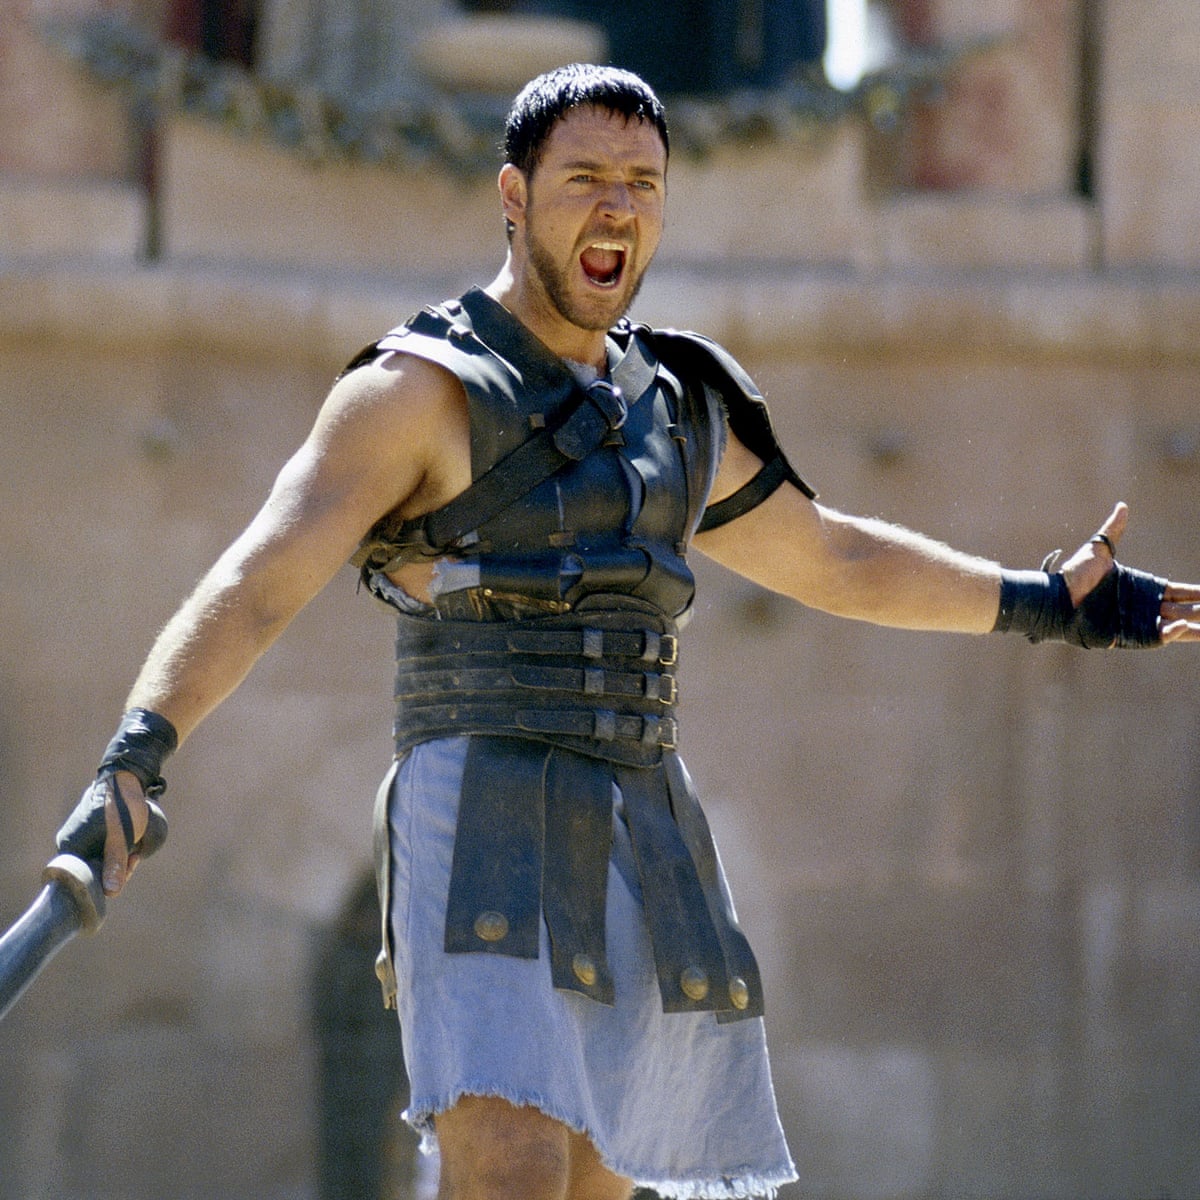 gladiator sequel currently in the works